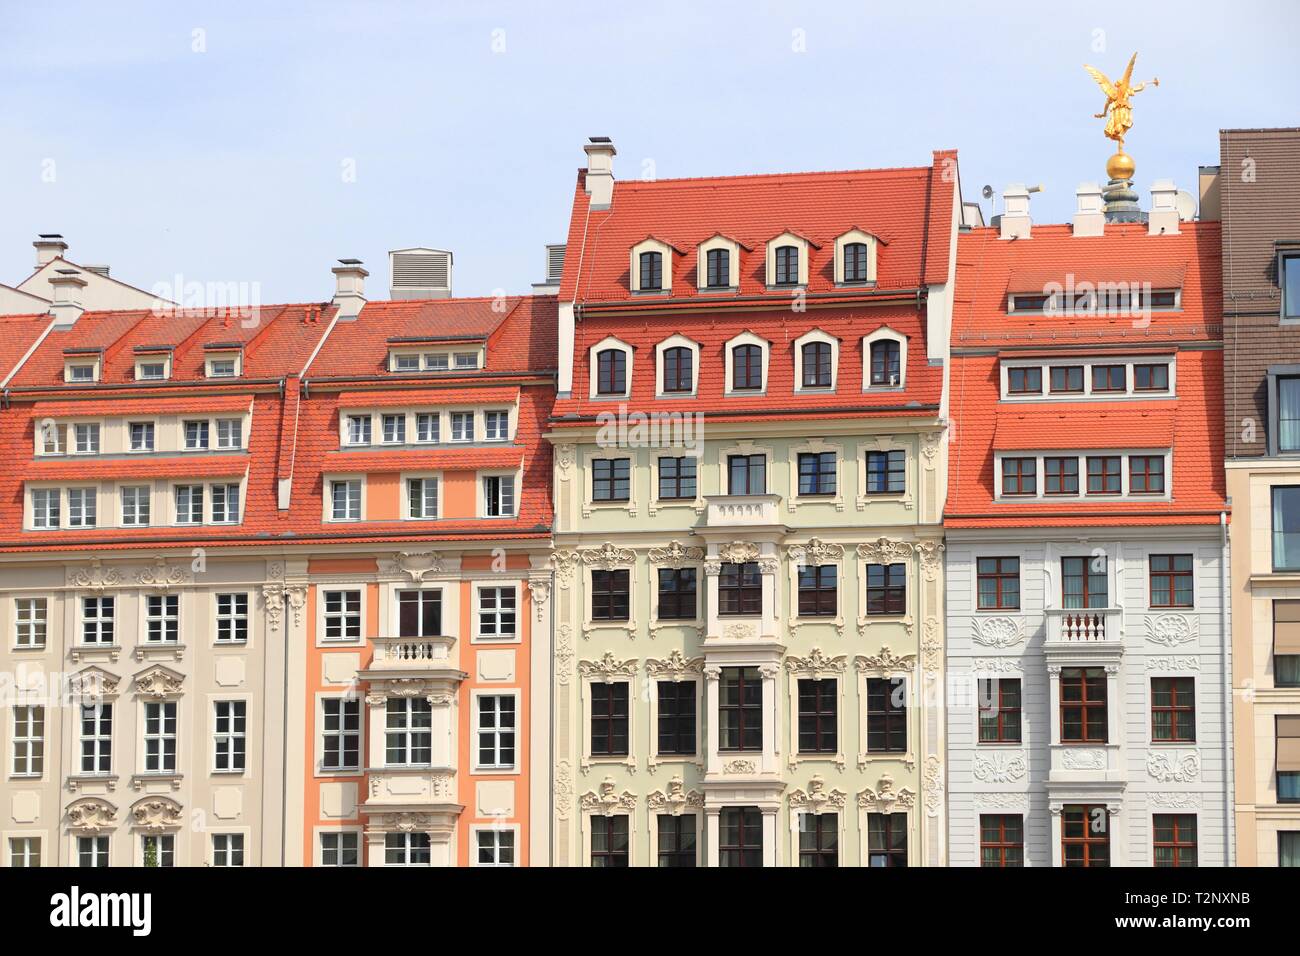 Dresden city in Germany (State of Sachsen). Old Town (Altstadt) colorful architecture street view. Stock Photo